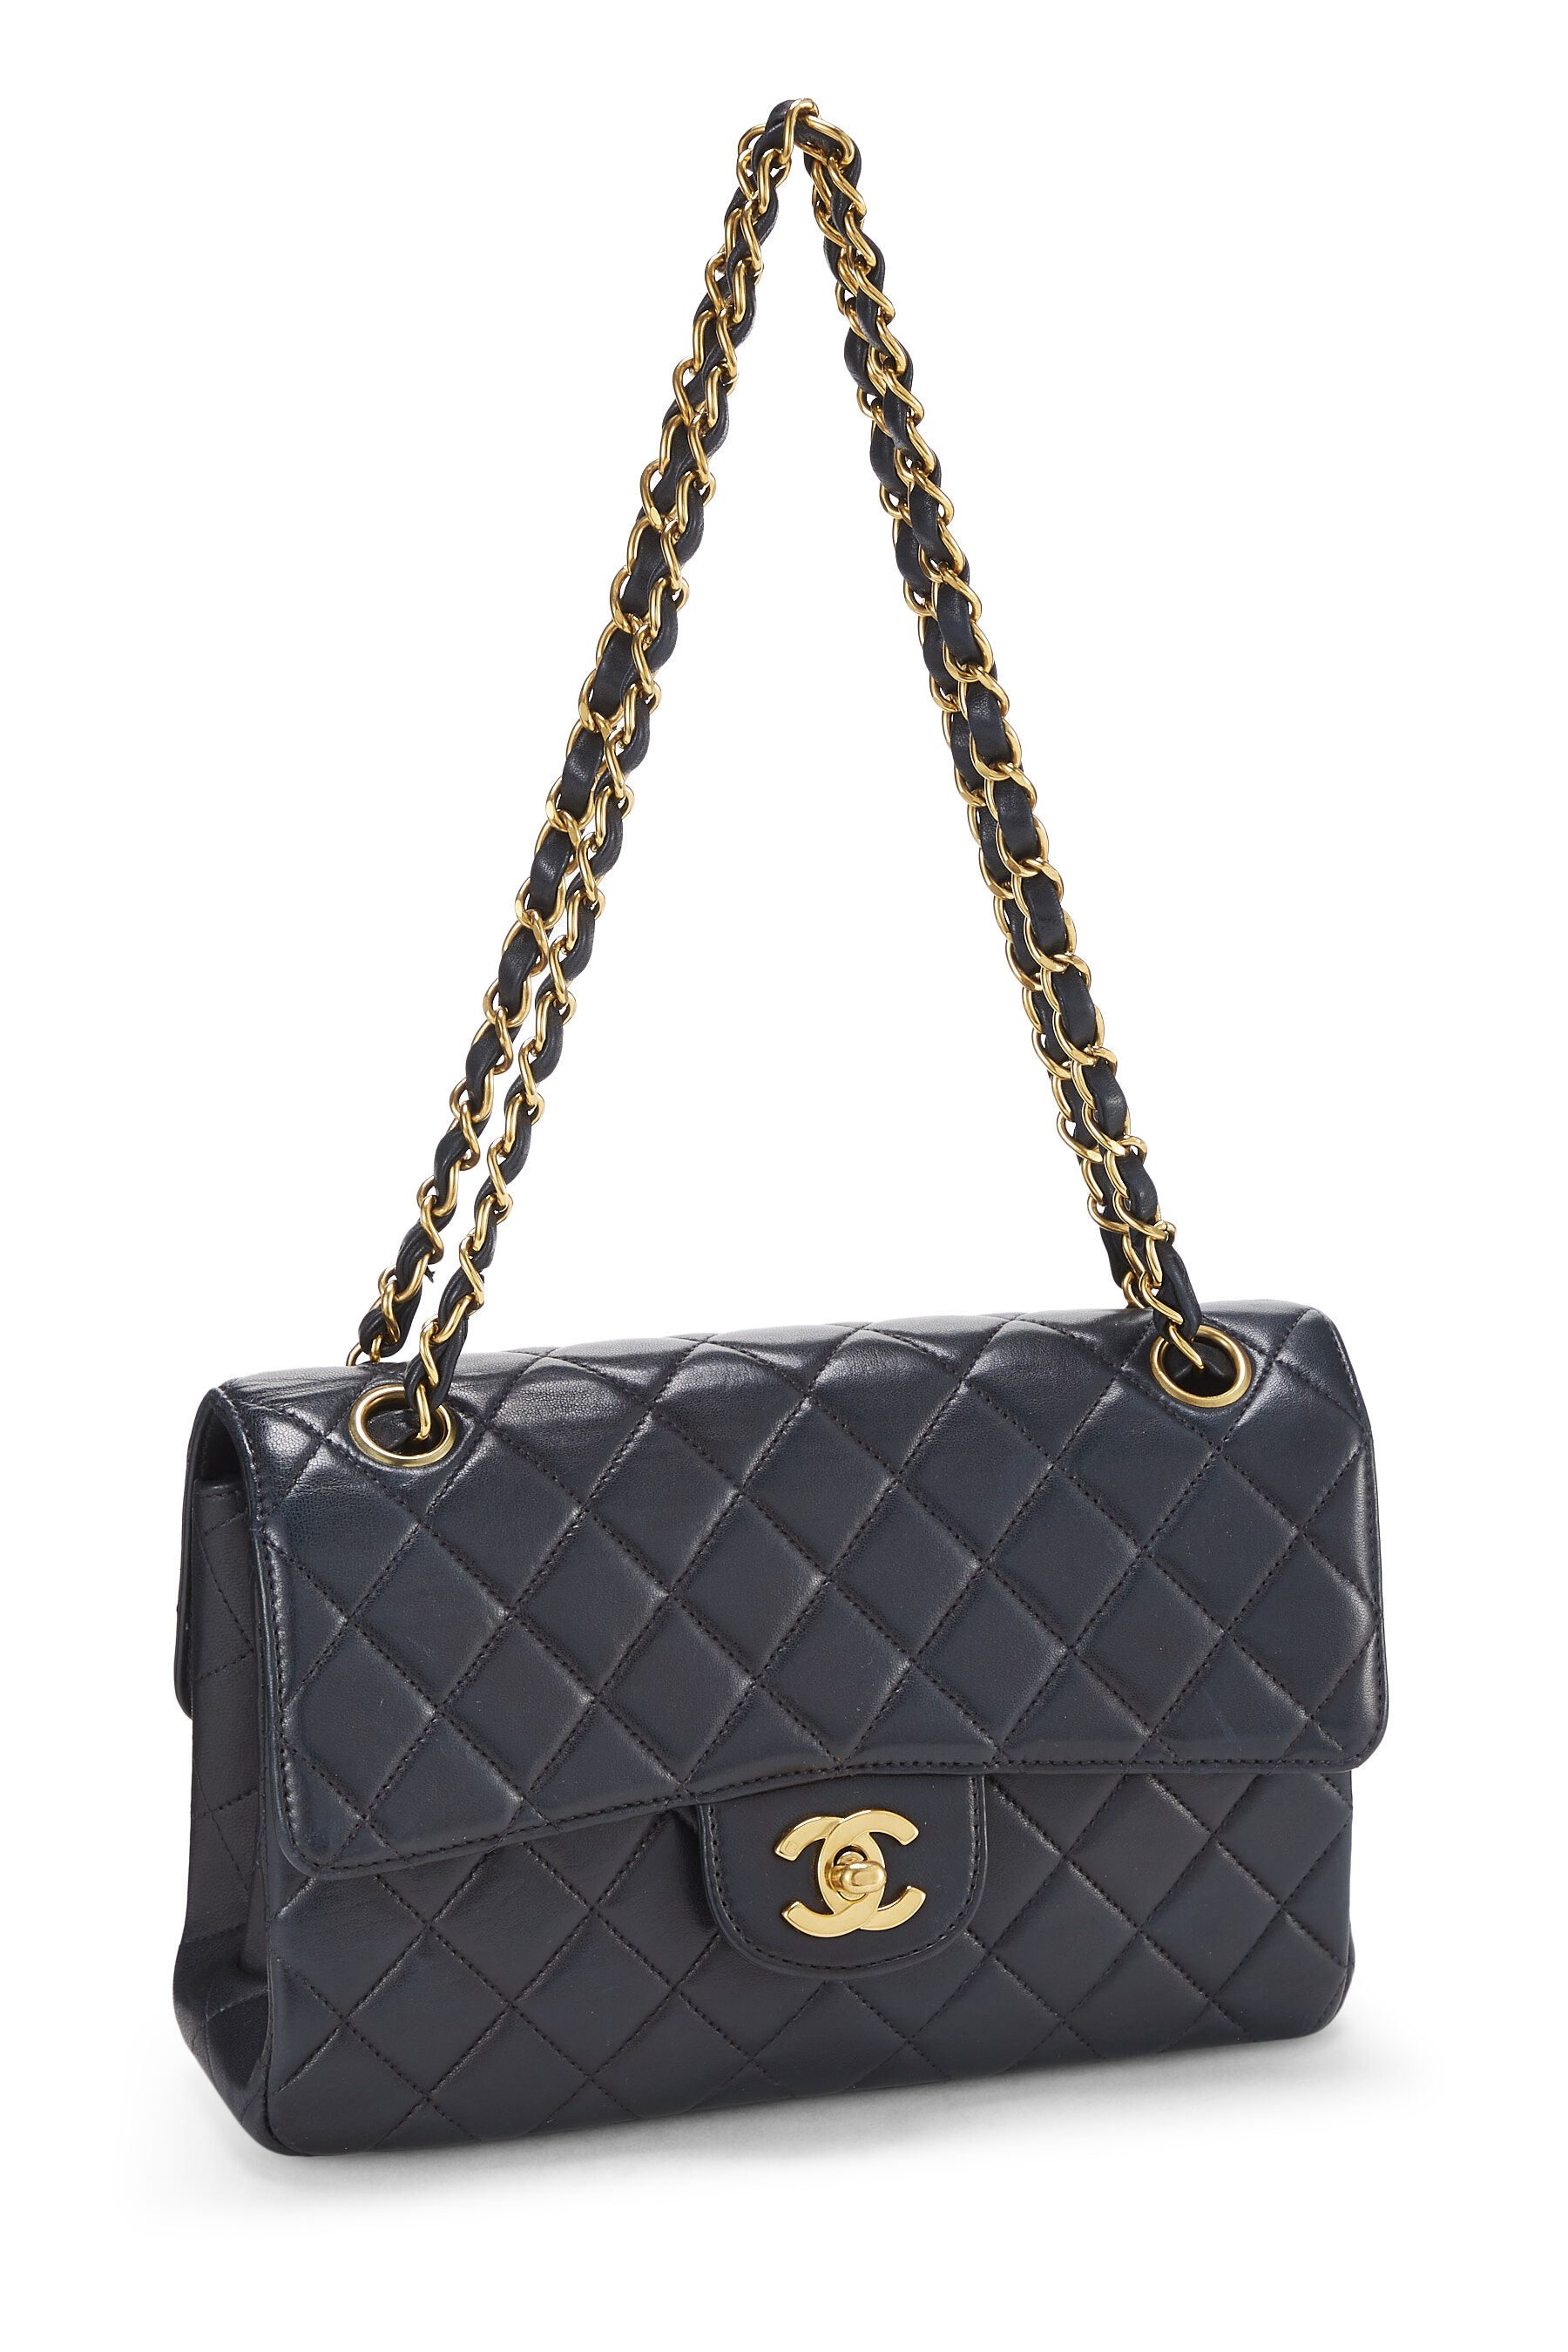 Chanel - Navy Quilted Lambskin Double Sided Flap Small